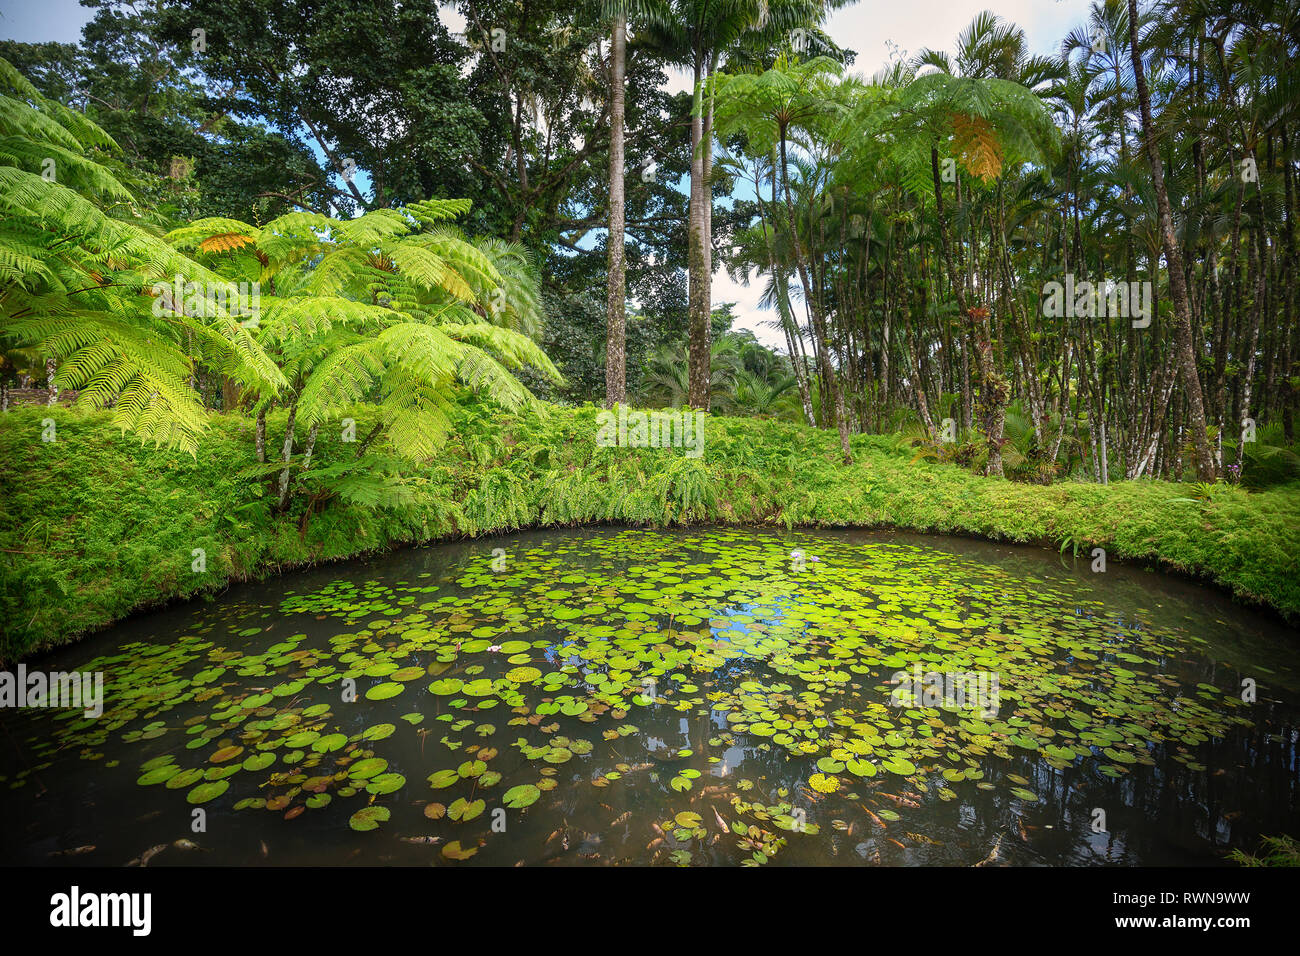 Fort-de-France, Martinique - January 15, 2018: Tropical Balata garden. The Balata is a botanical garden located on the Route de Balata about 10 km out Stock Photo